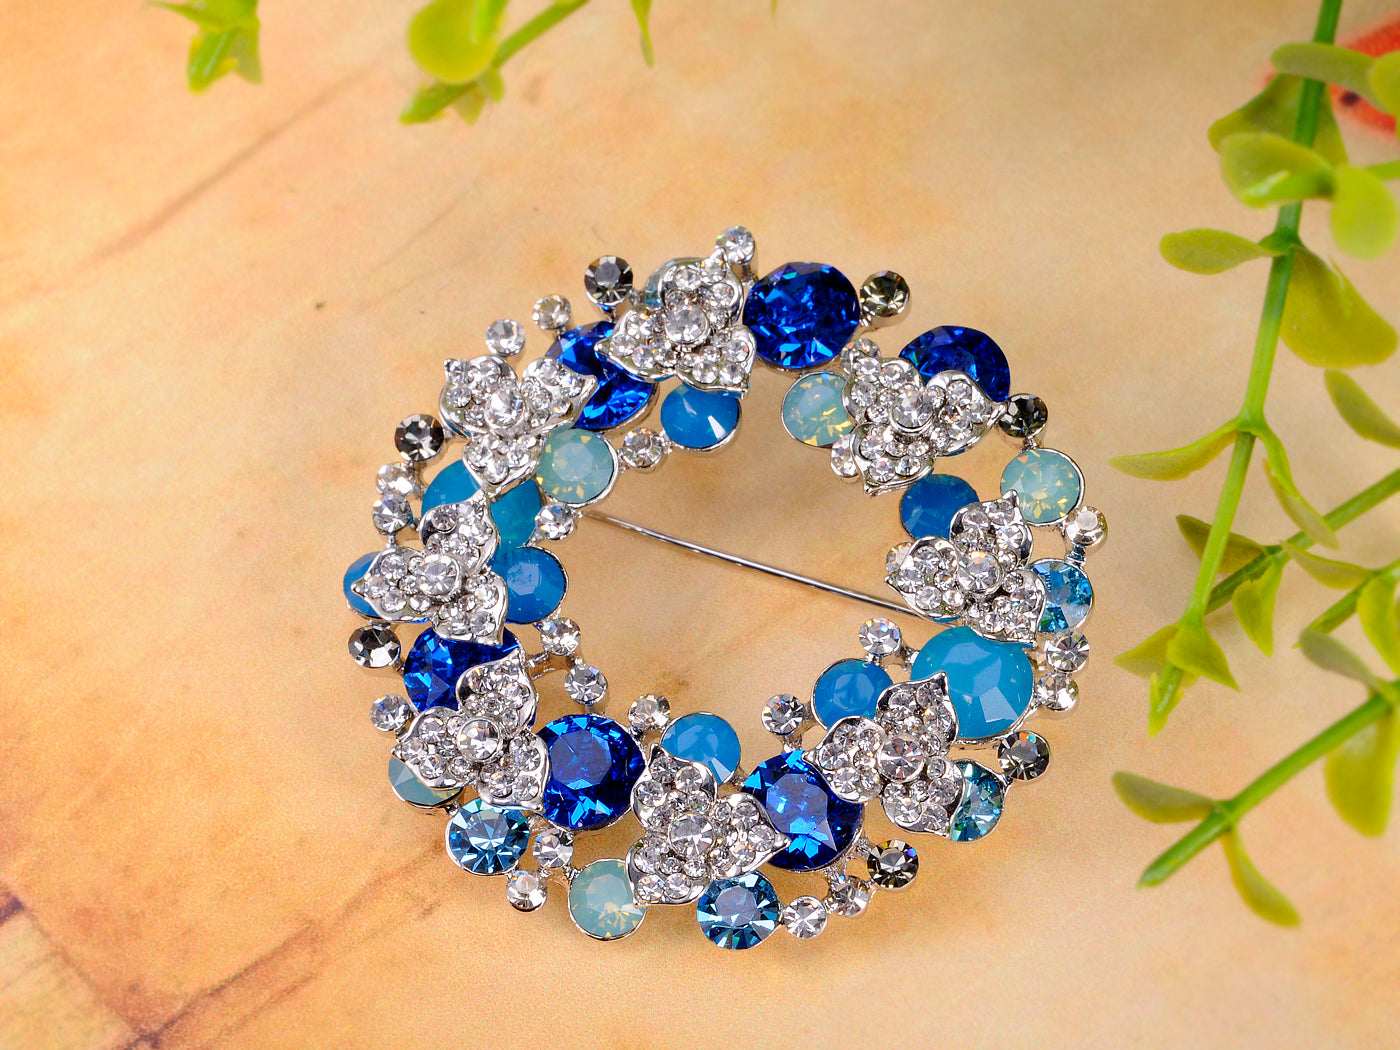 Swarovski Crystal Pacific Sapphire Color Christmas Floral Wreath Gift Cystal Pin Brooch